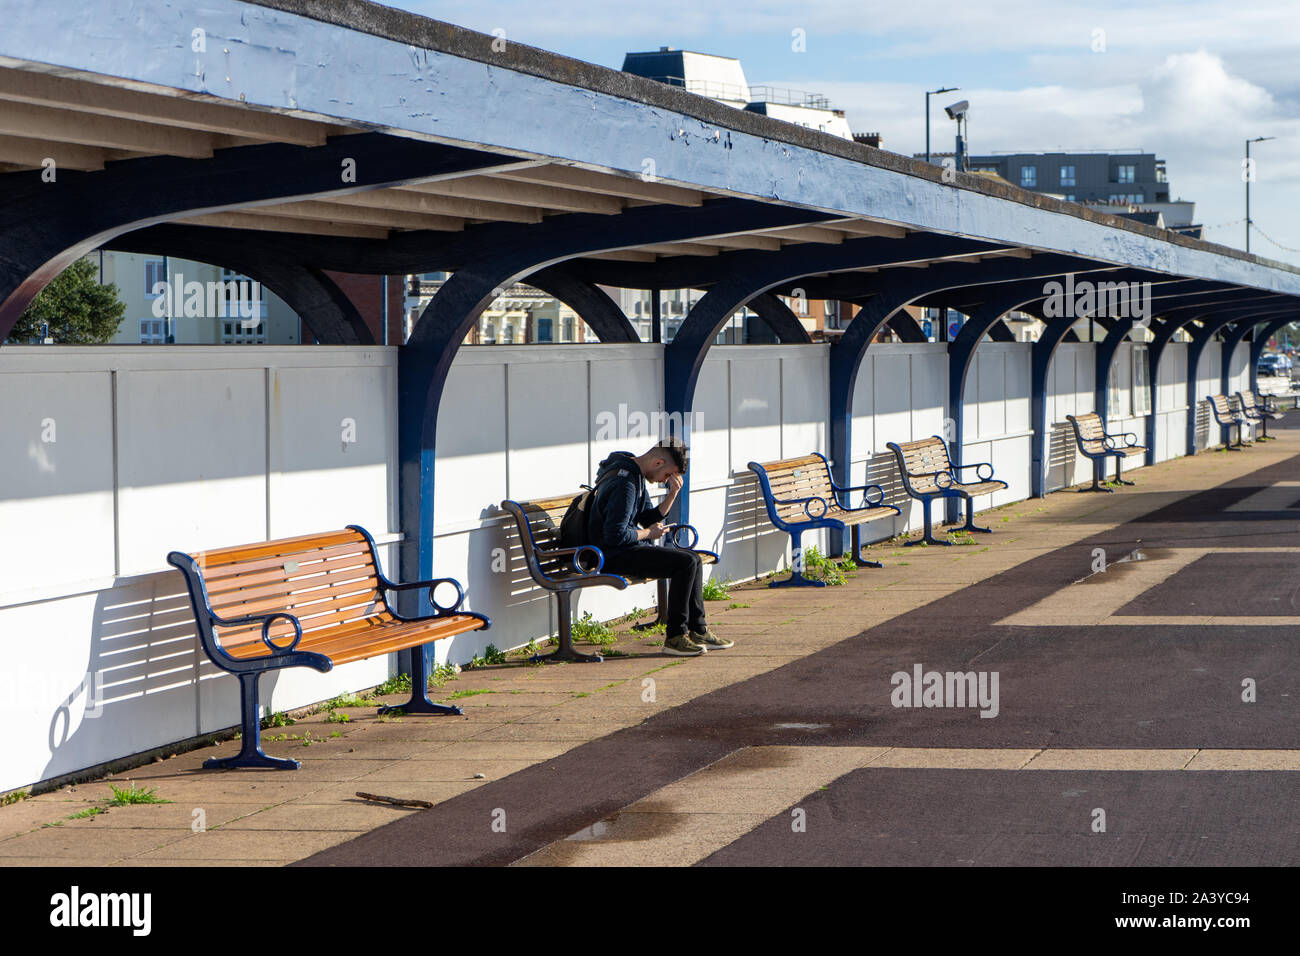 A young man sitting alone on a bench with his head in his hands Stock Photo